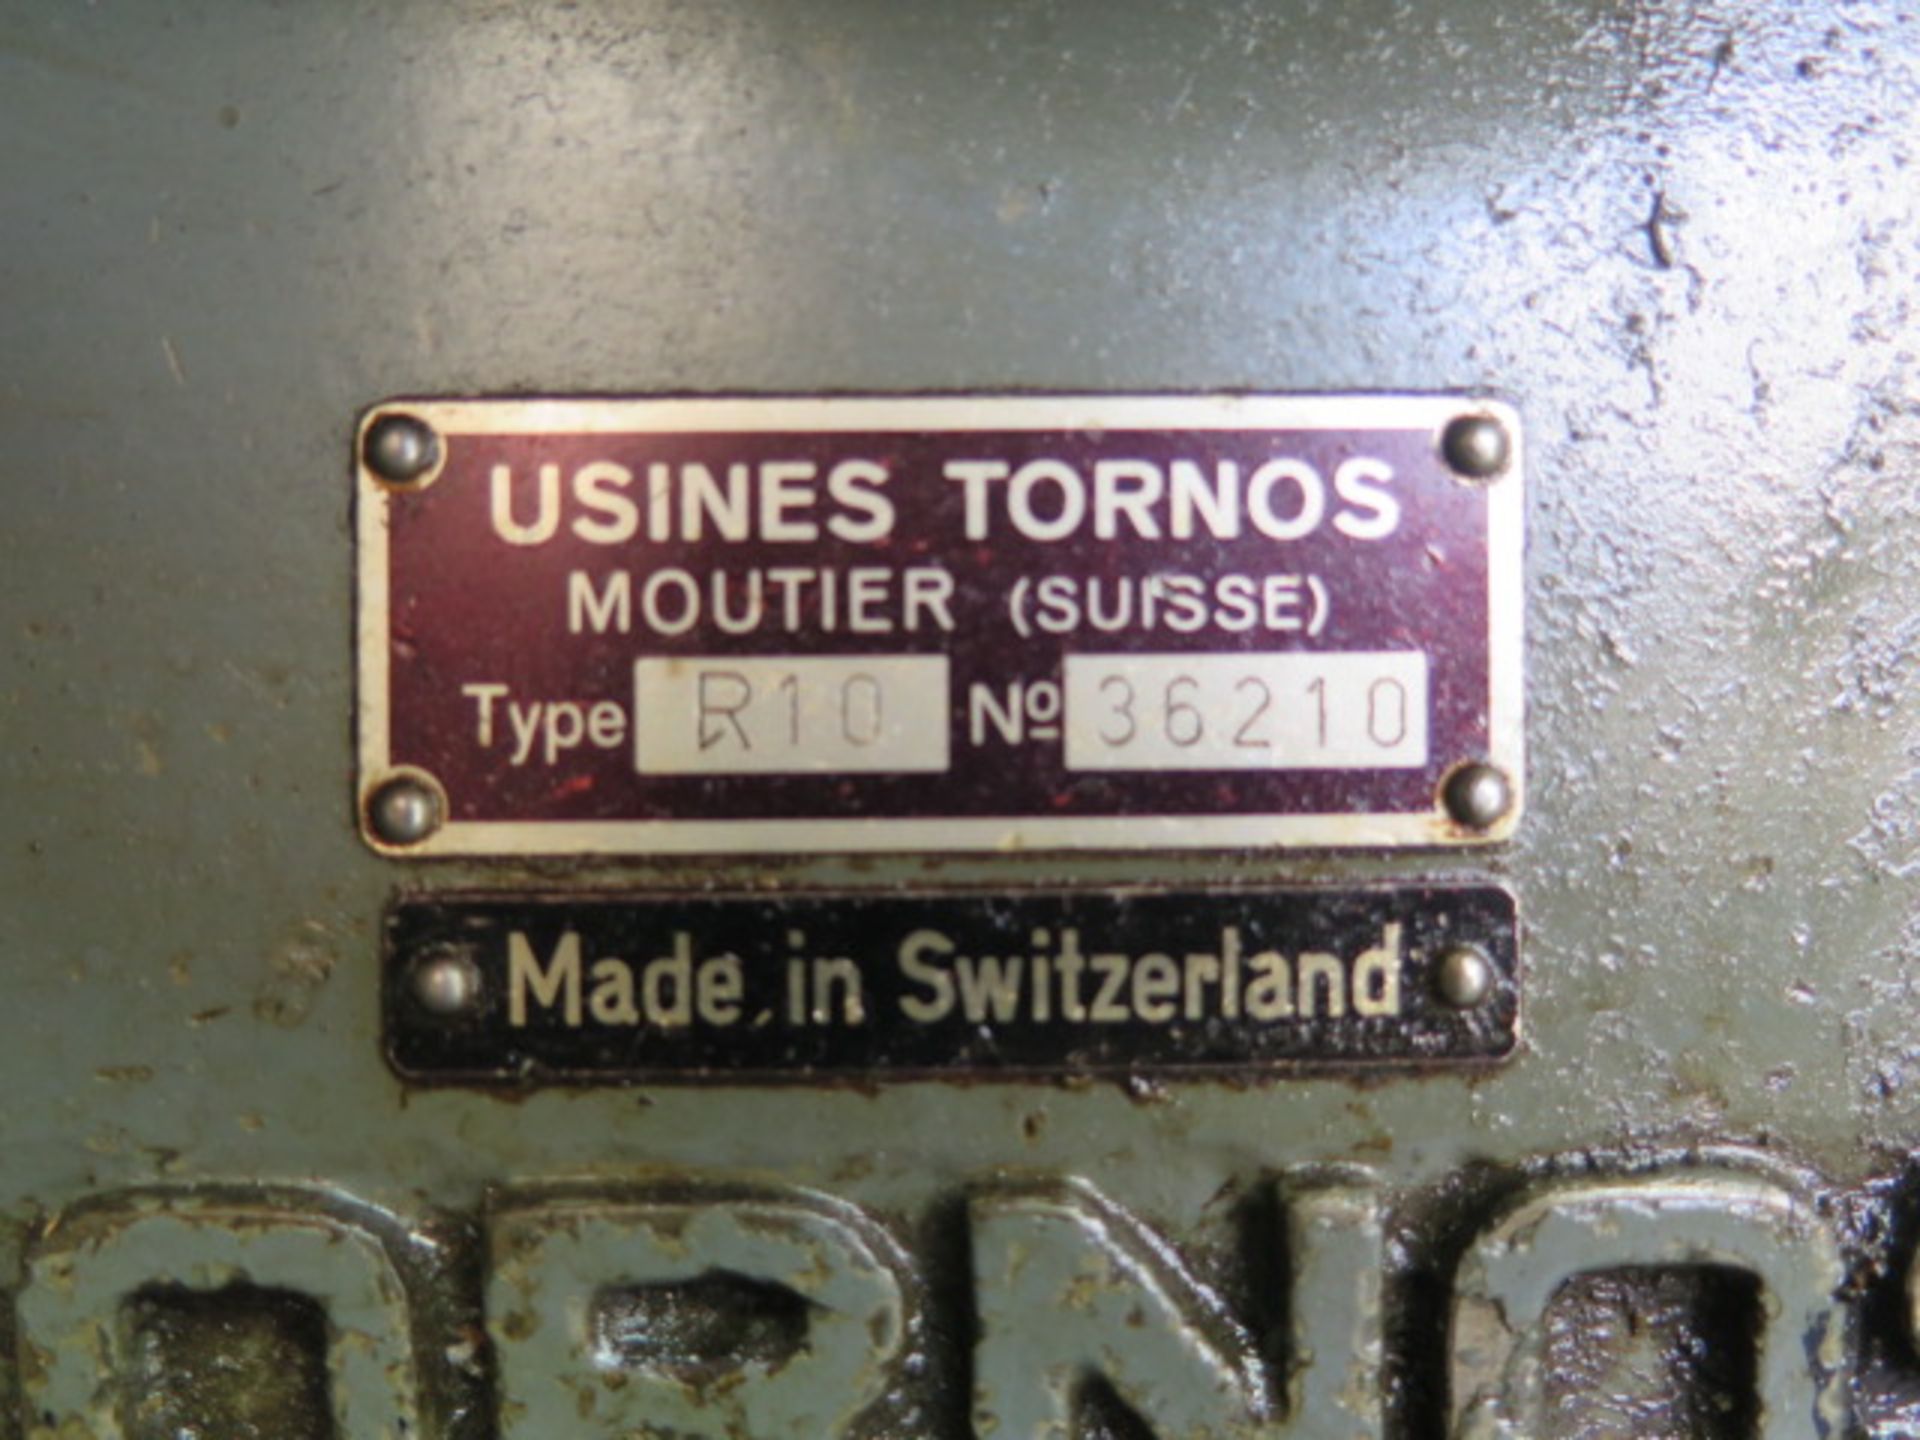 Tornos mdl. R10 10mm (0.394”) Cap Single Spindle Automatic Screw Machine s/n 36210 w/ 5-Cross - Image 7 of 7